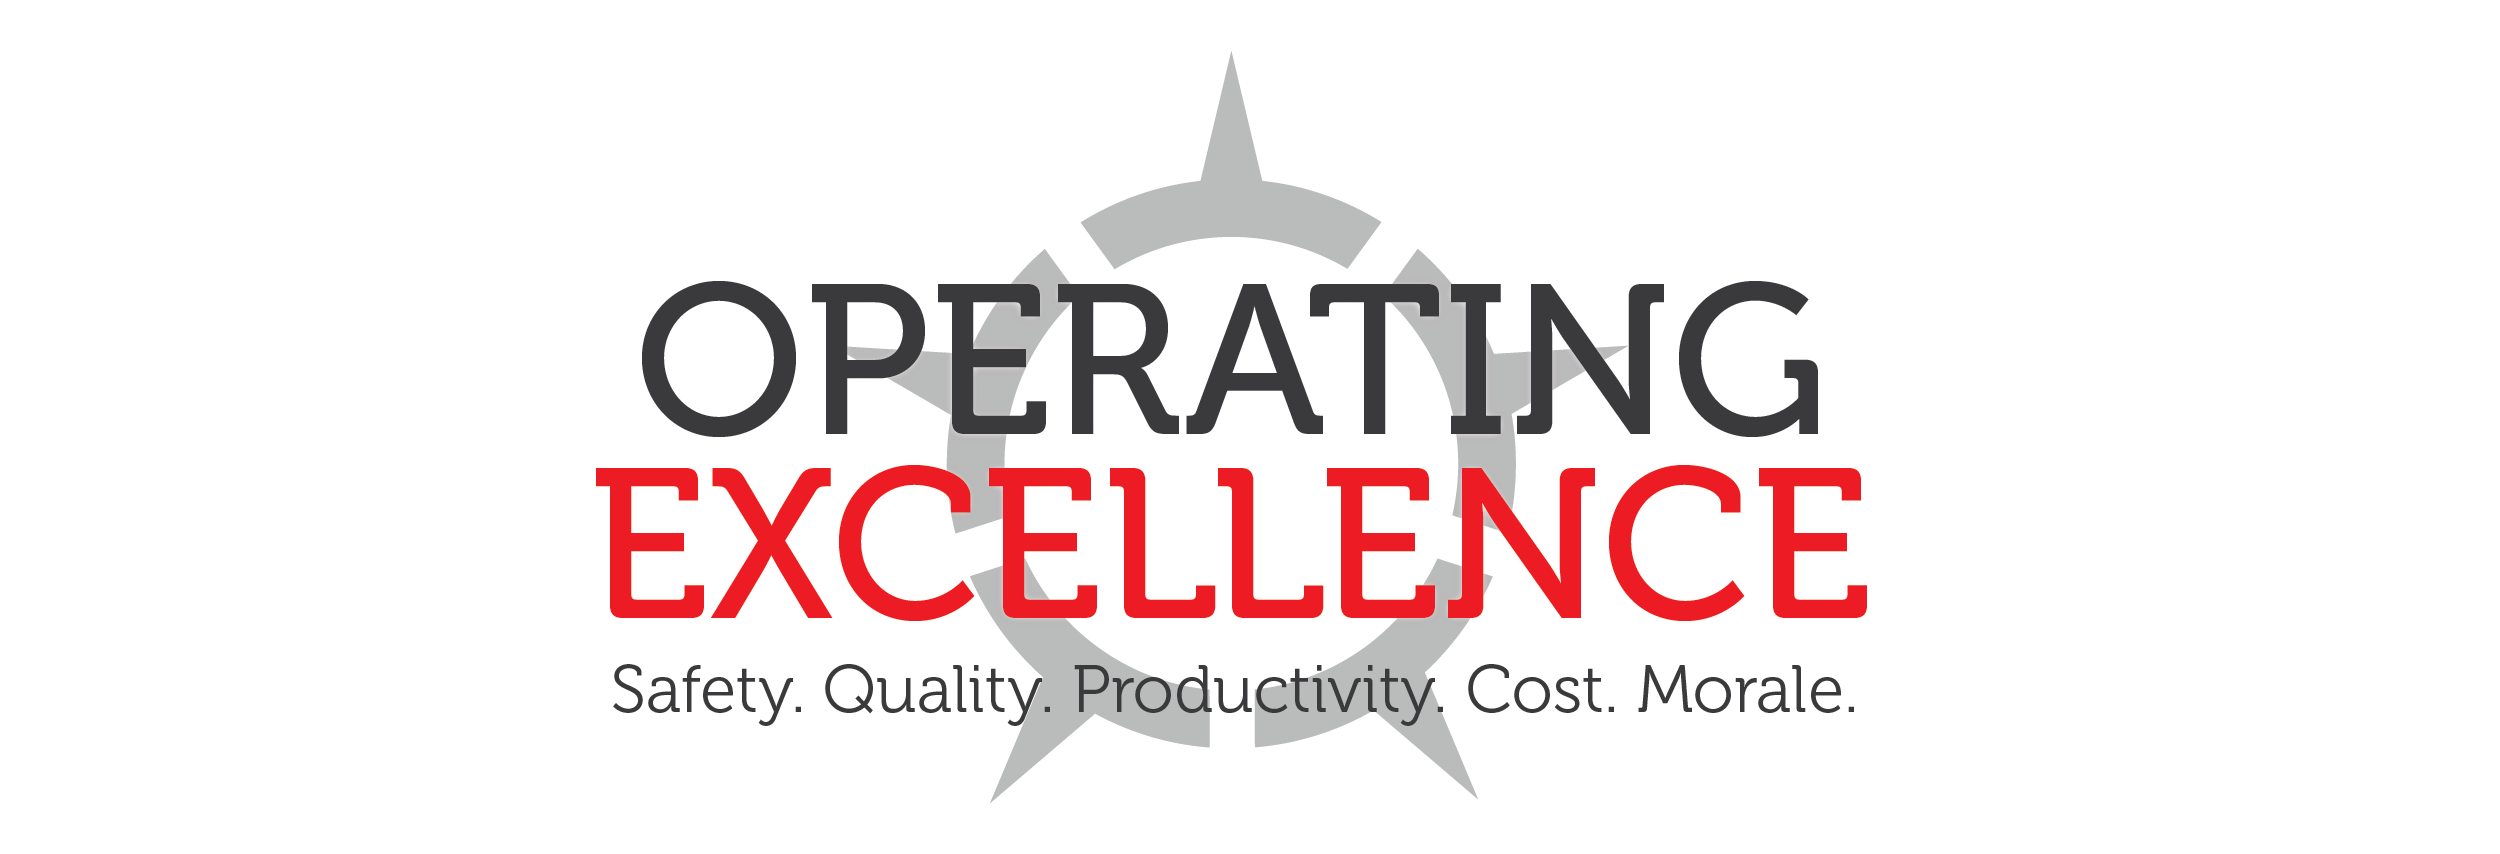 leadership clipart operational excellence